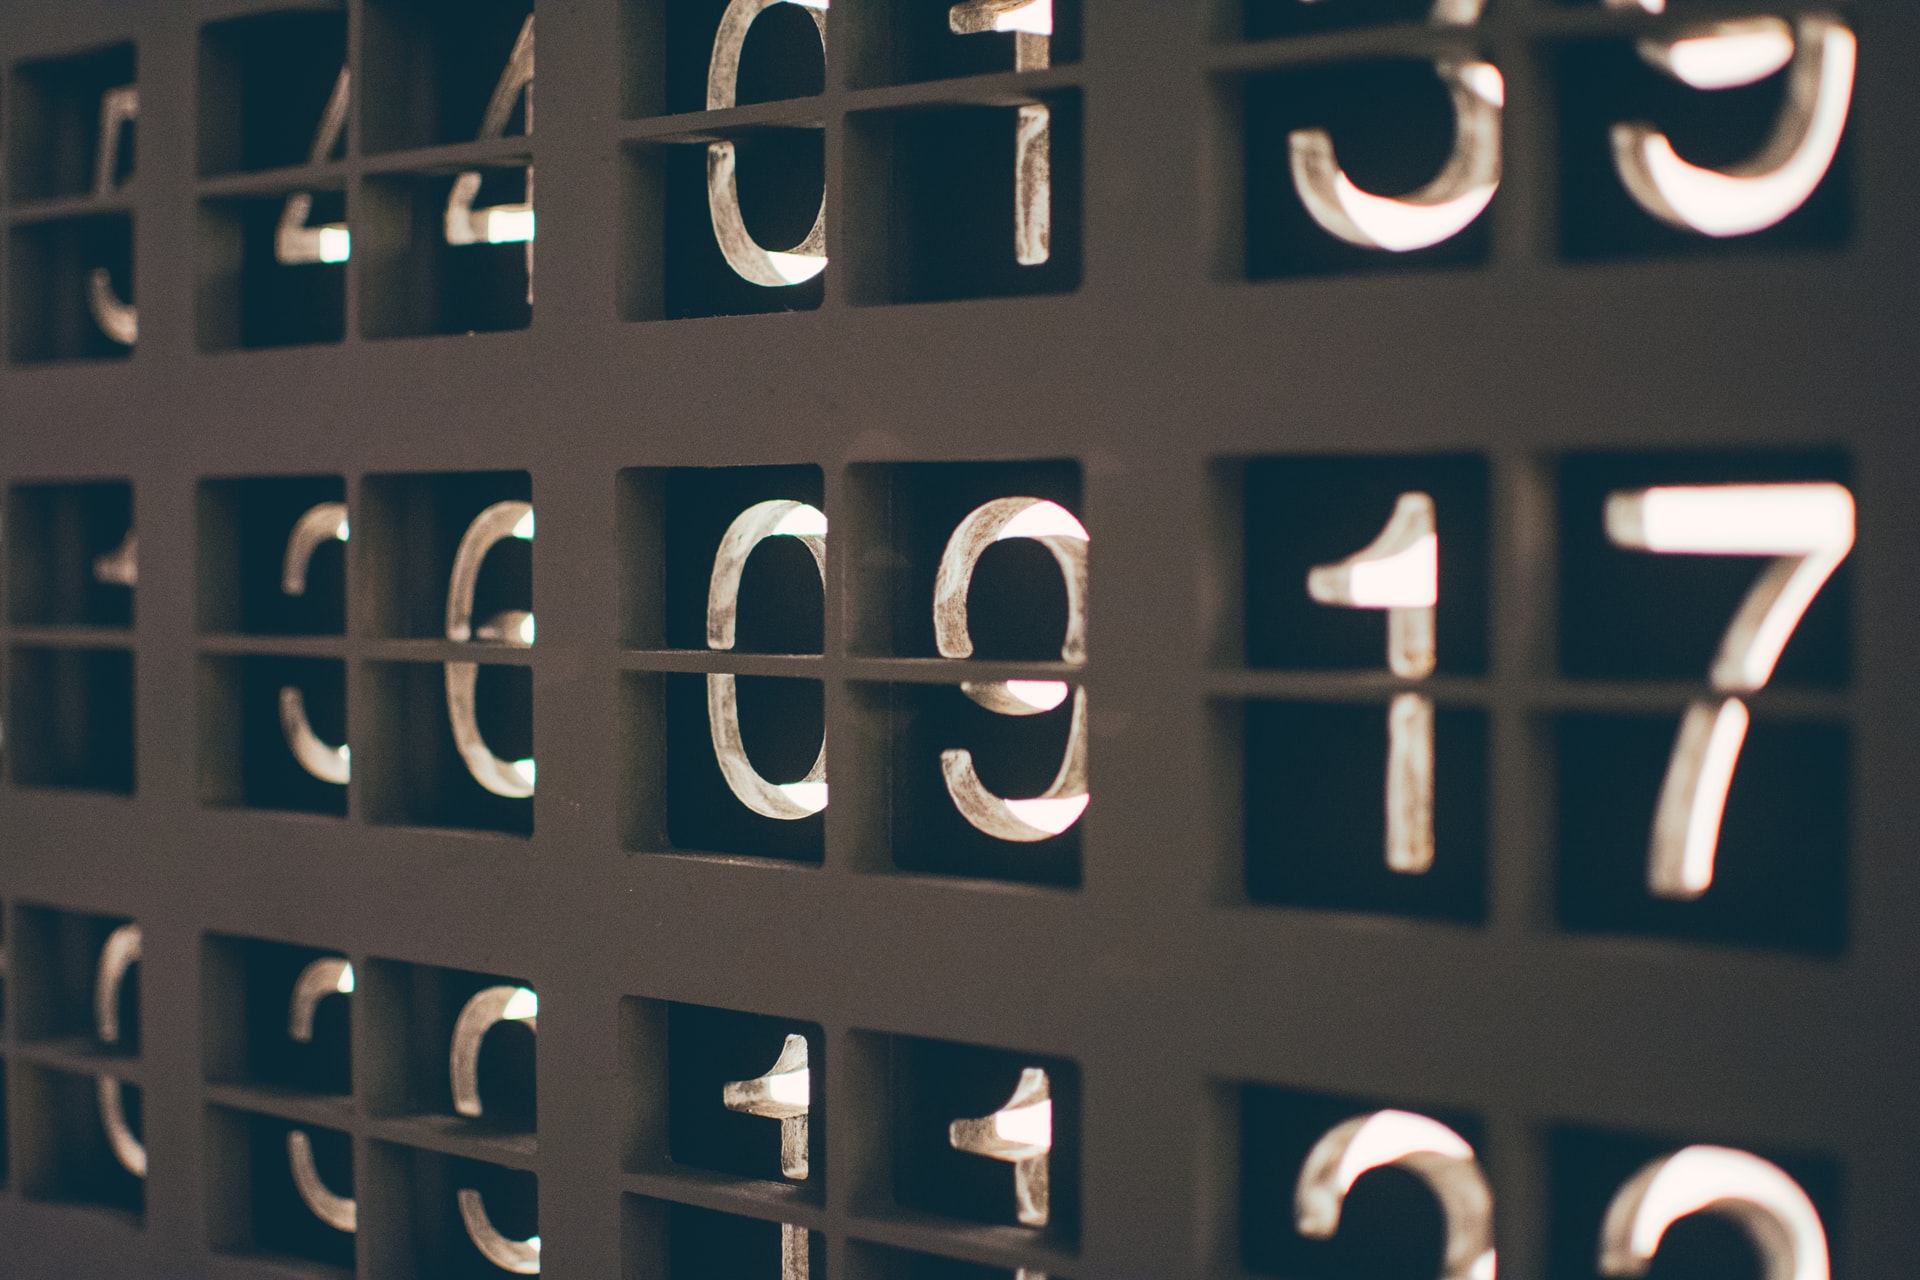 numbers to symbolise candidates not remembering their numbers in the admissions process